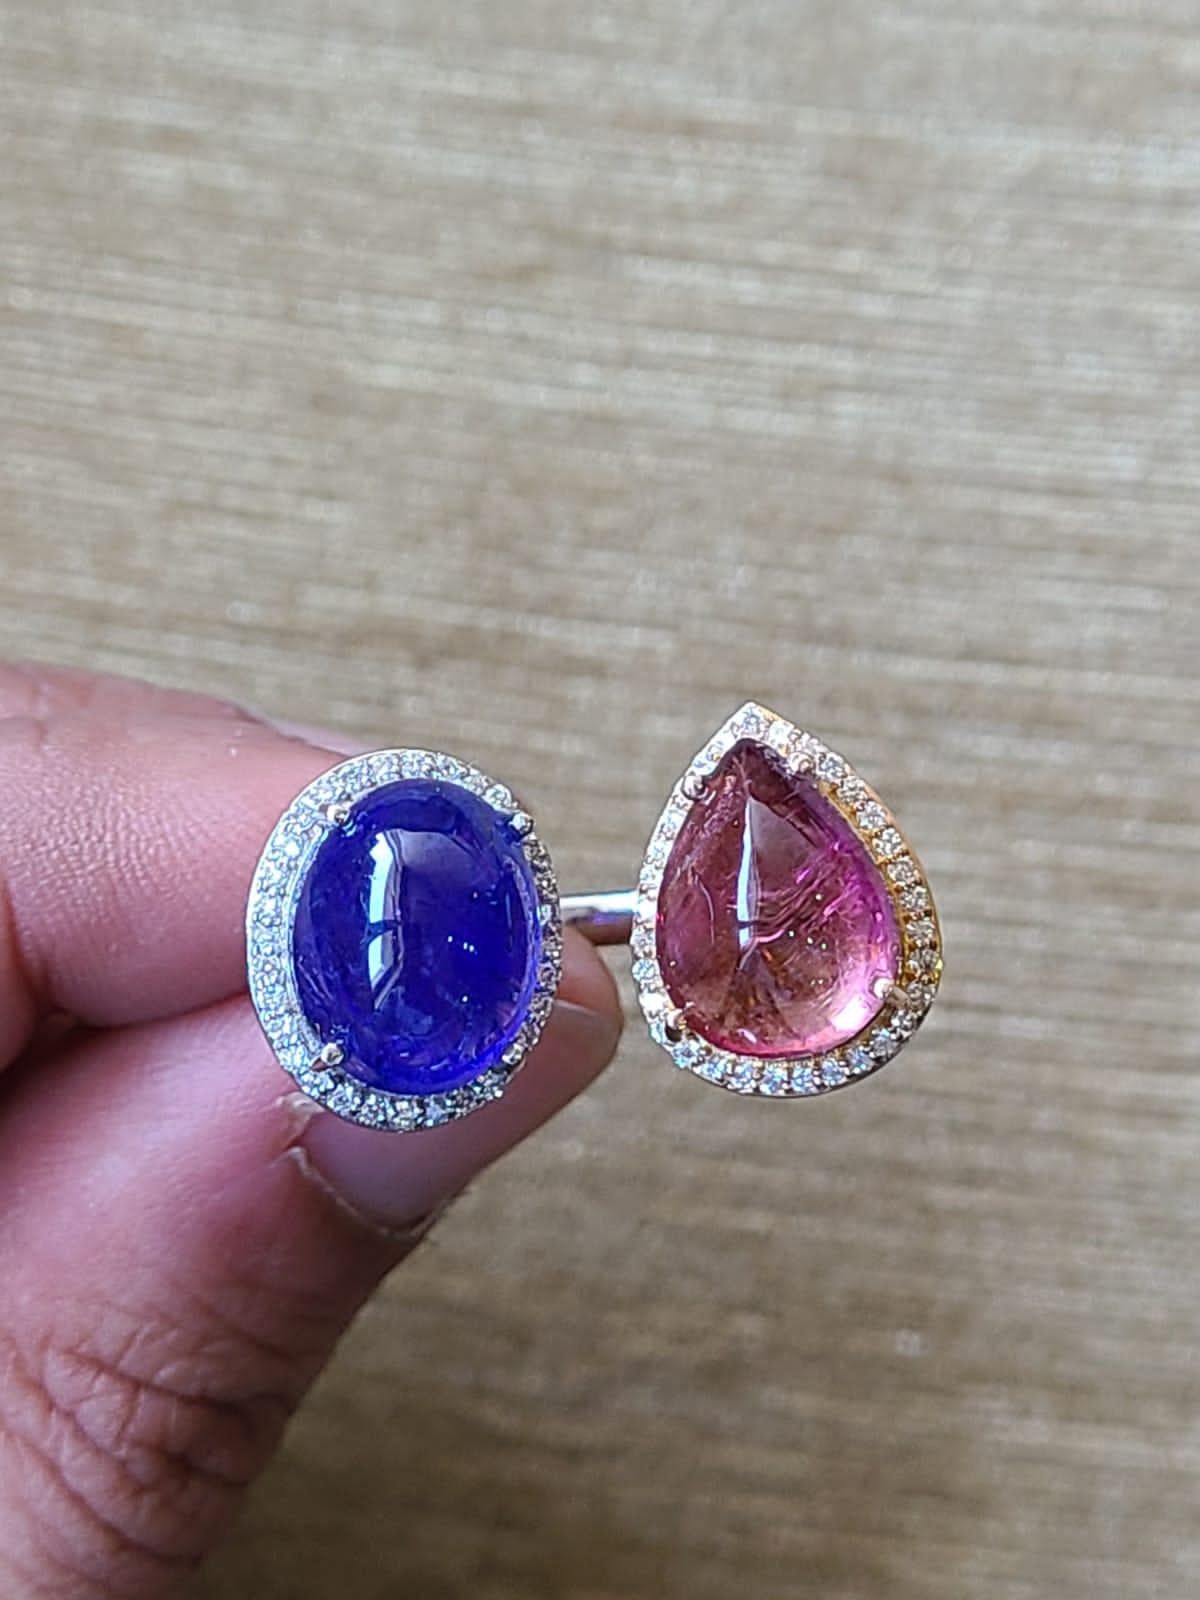 A very special and one of a kind, Tanzanite & Rubellite Cocktail Ring/ Dome Ring set in 18K Gold & Diamonds. The weight of the Tanzanite cabochon is 8.79 carats. The Tanzanite is ethically sourced from Tanzania. The weight of the Rubellite is 6.38